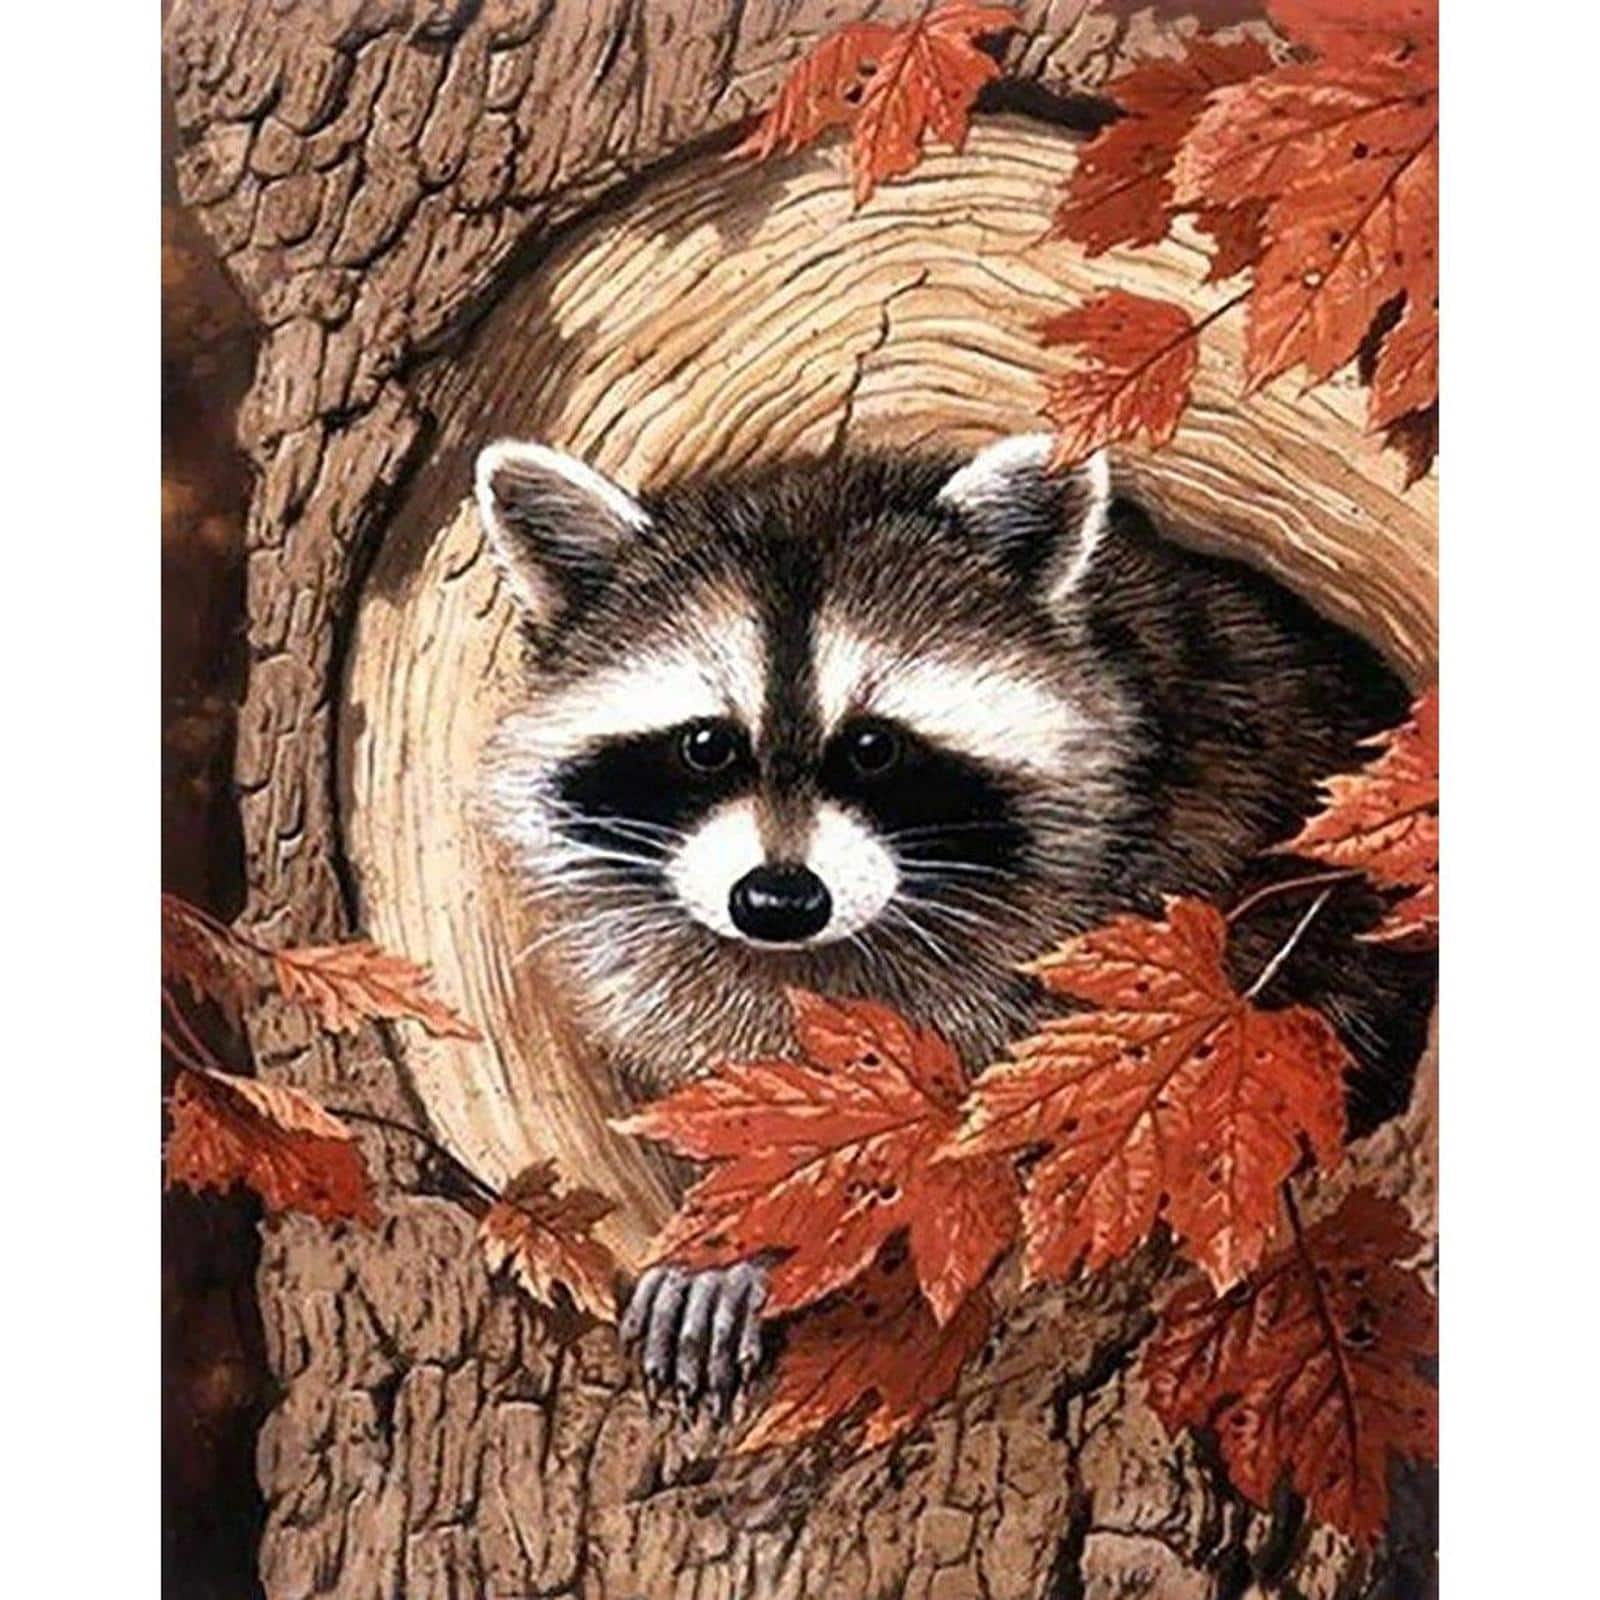 Crafting Spark Racoon in the Tree Diamond Painting Kit